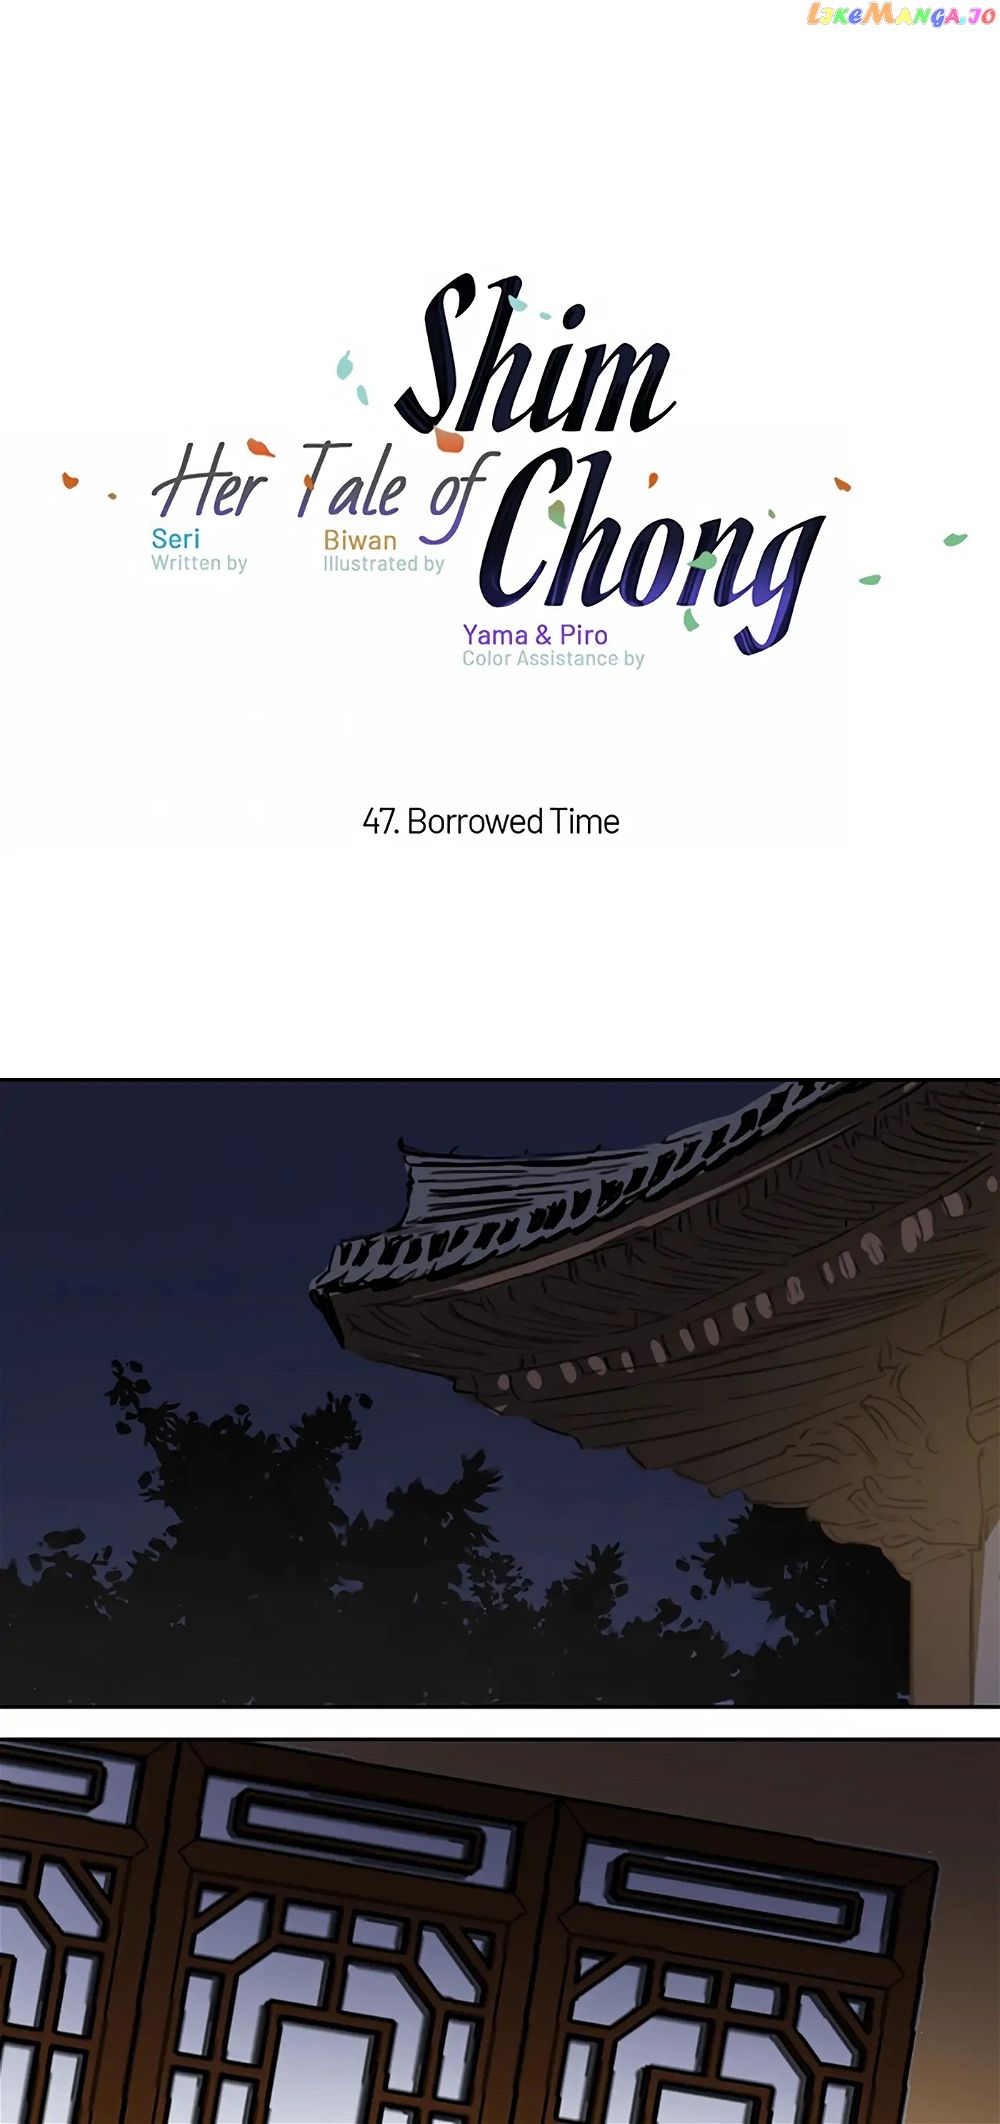 Her Tale of Shim Chong Chapter 47 - Page 1